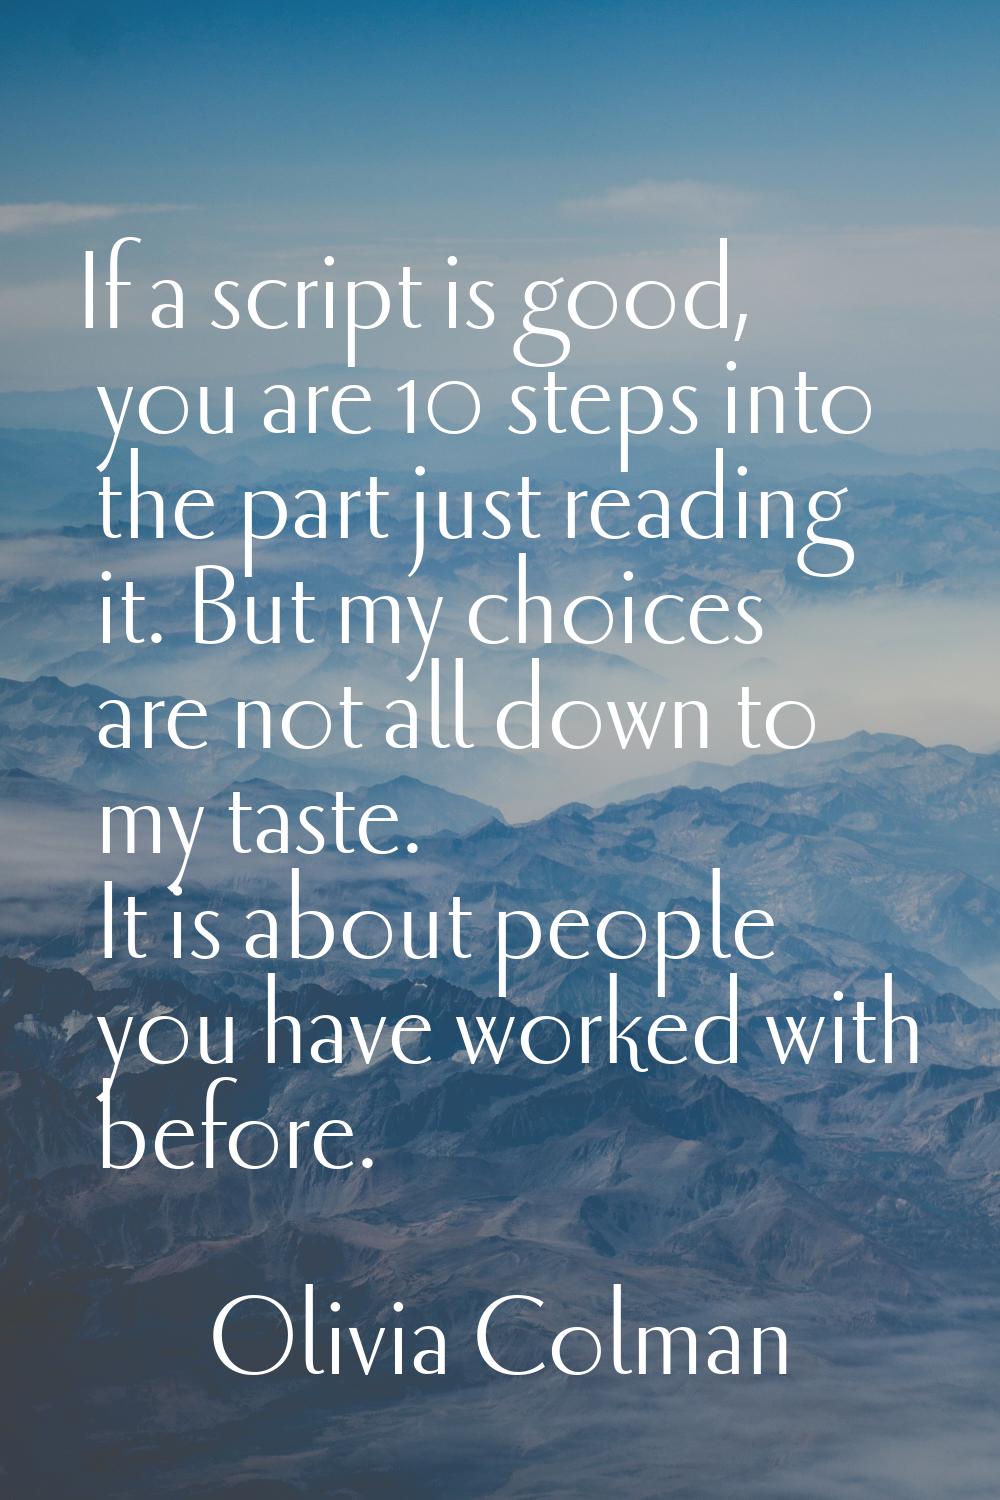 If a script is good, you are 10 steps into the part just reading it. But my choices are not all dow